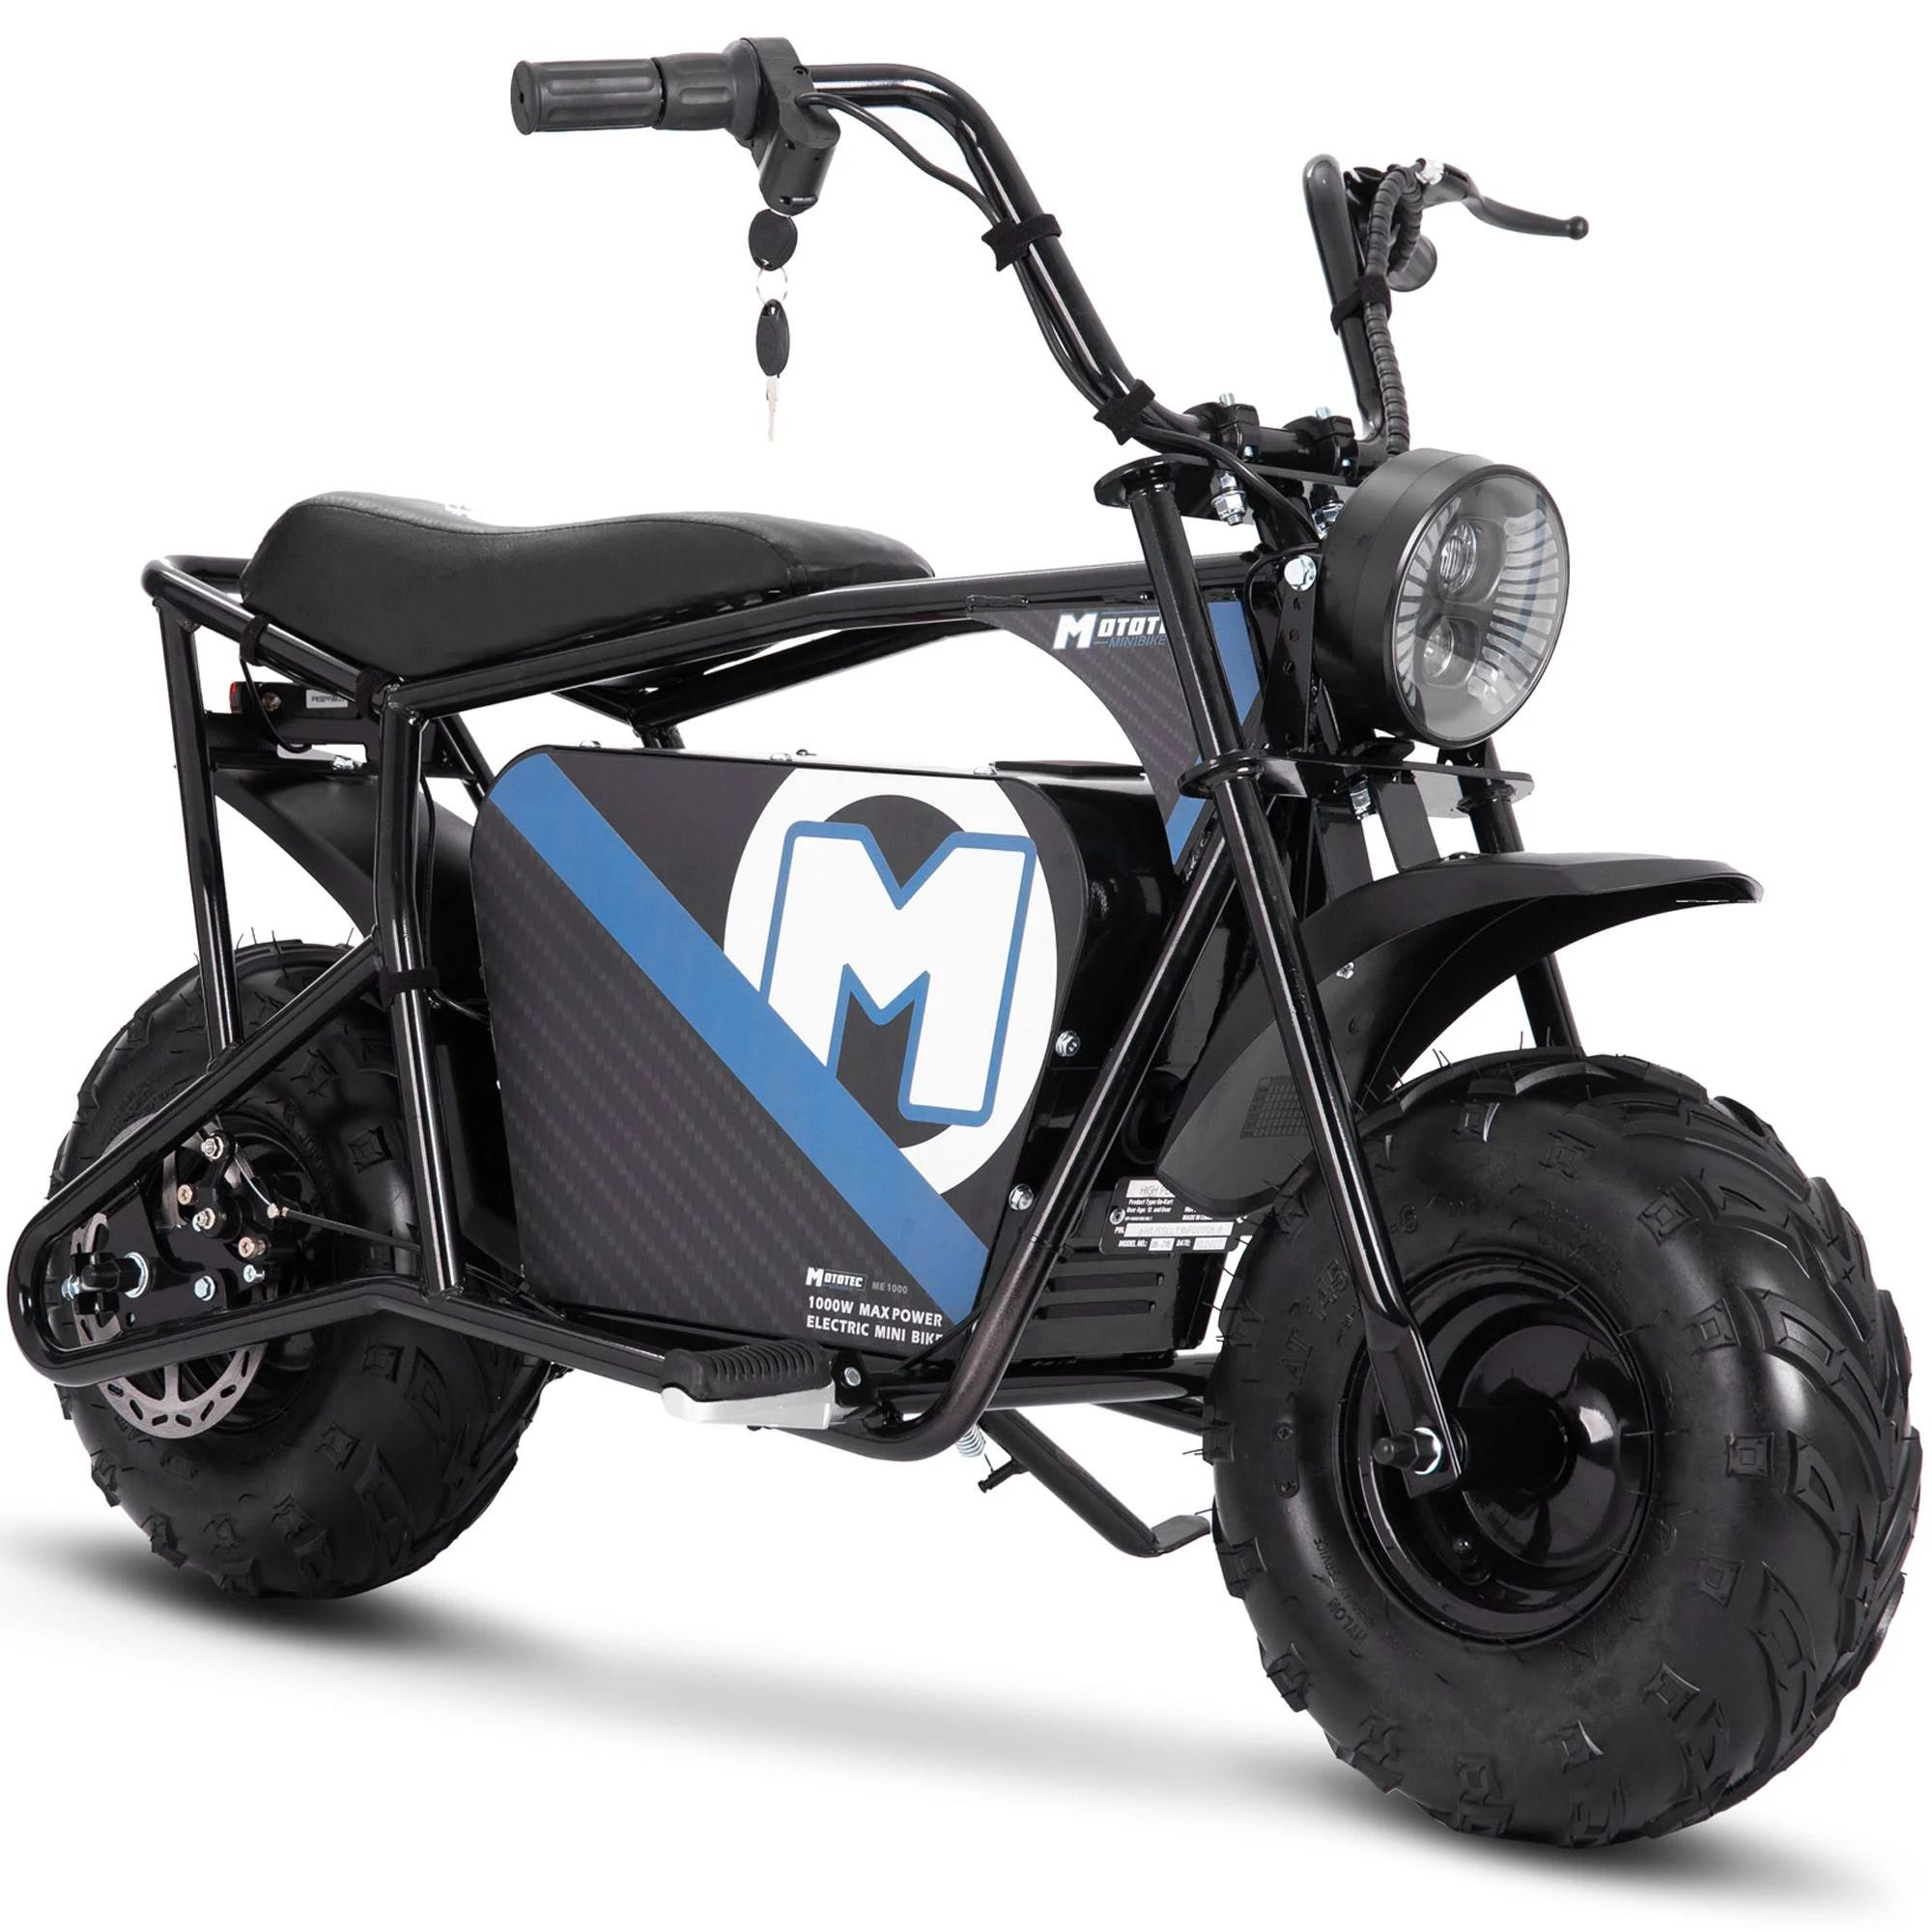 MotoTec 48V Electric Powered Mini Bike with Rugged Steel Frame and High-Speed Performance | Image